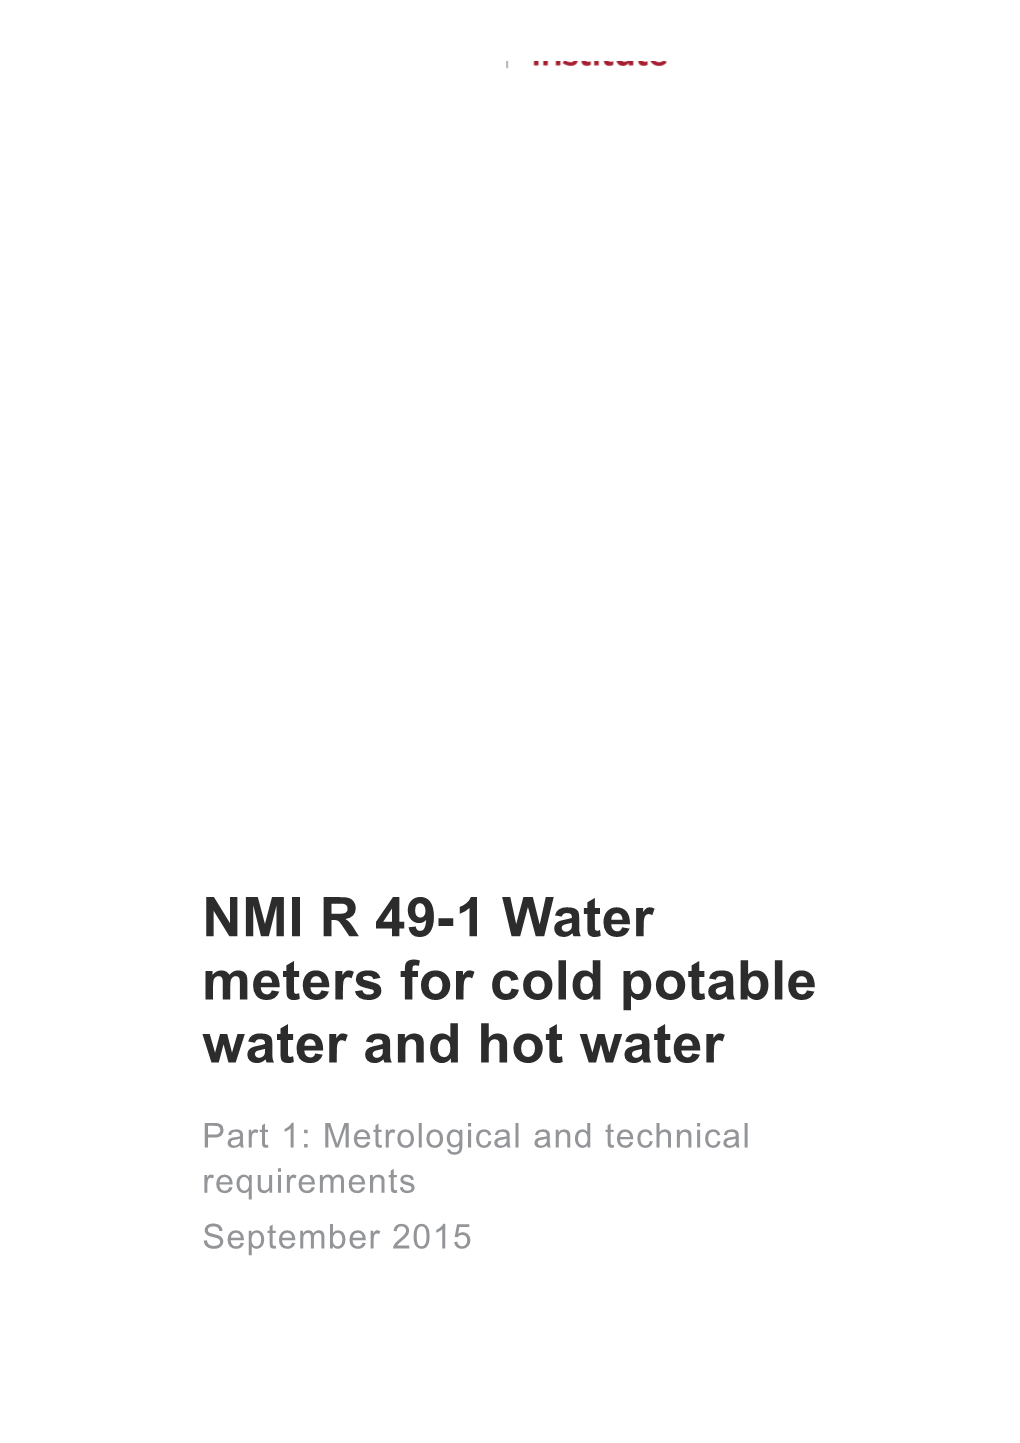 NMI R 49-1 Water Meters for Cold Potable Water and Hot Water